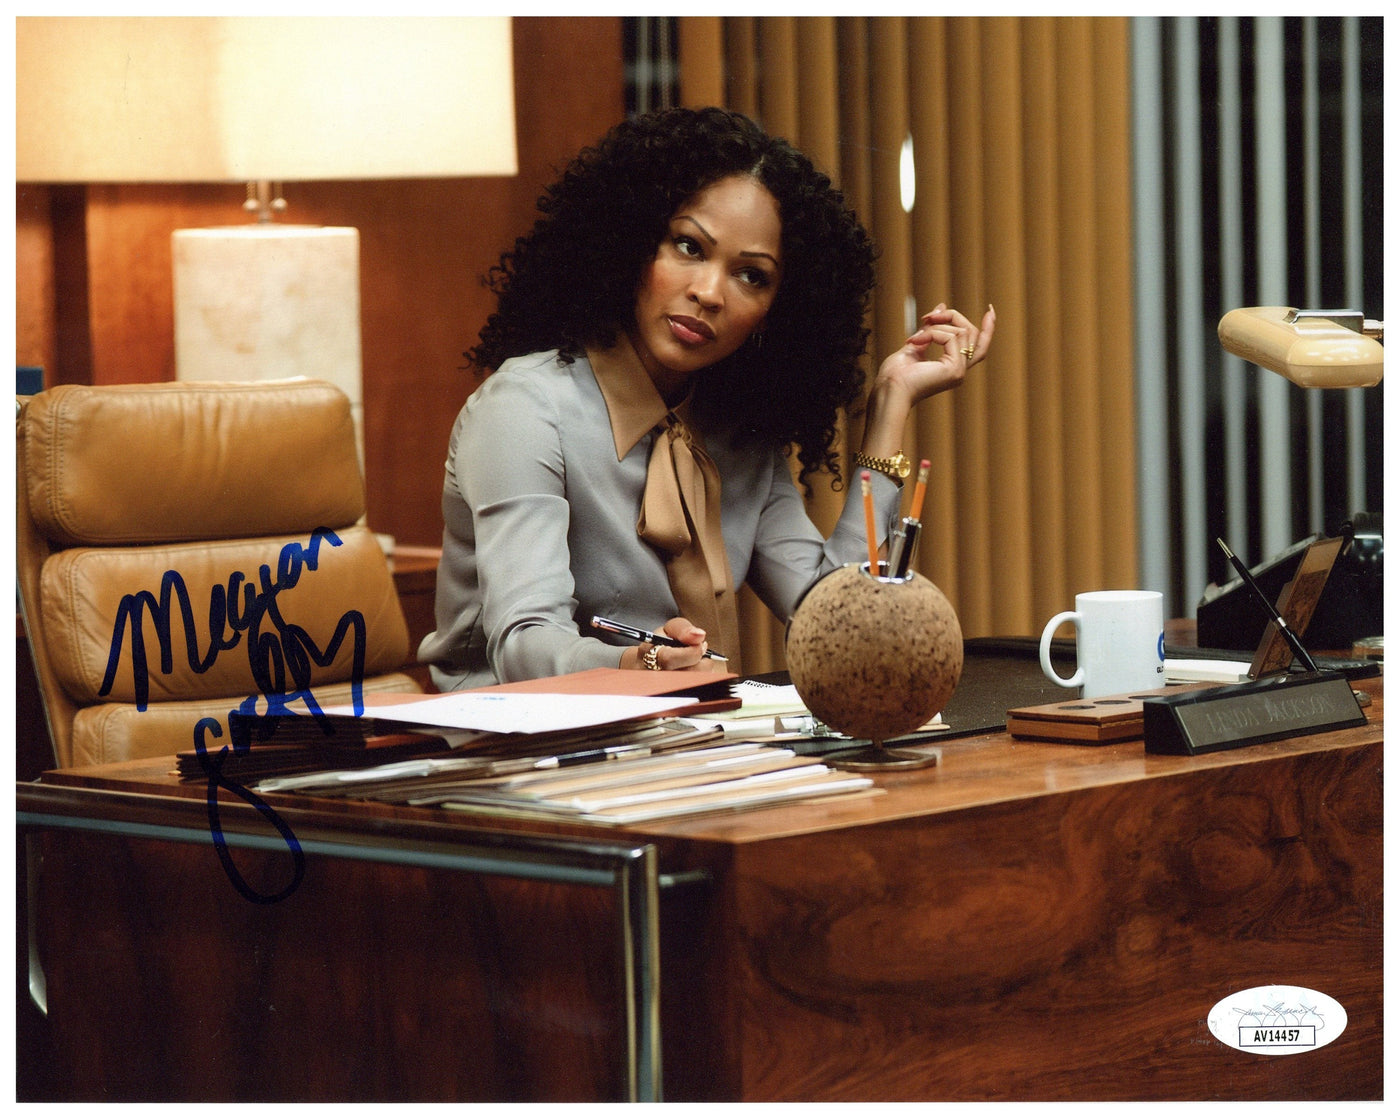 Meagan Good Signed 8x10 Photo Anchorman 2: The Legend Continues Autographed JSA